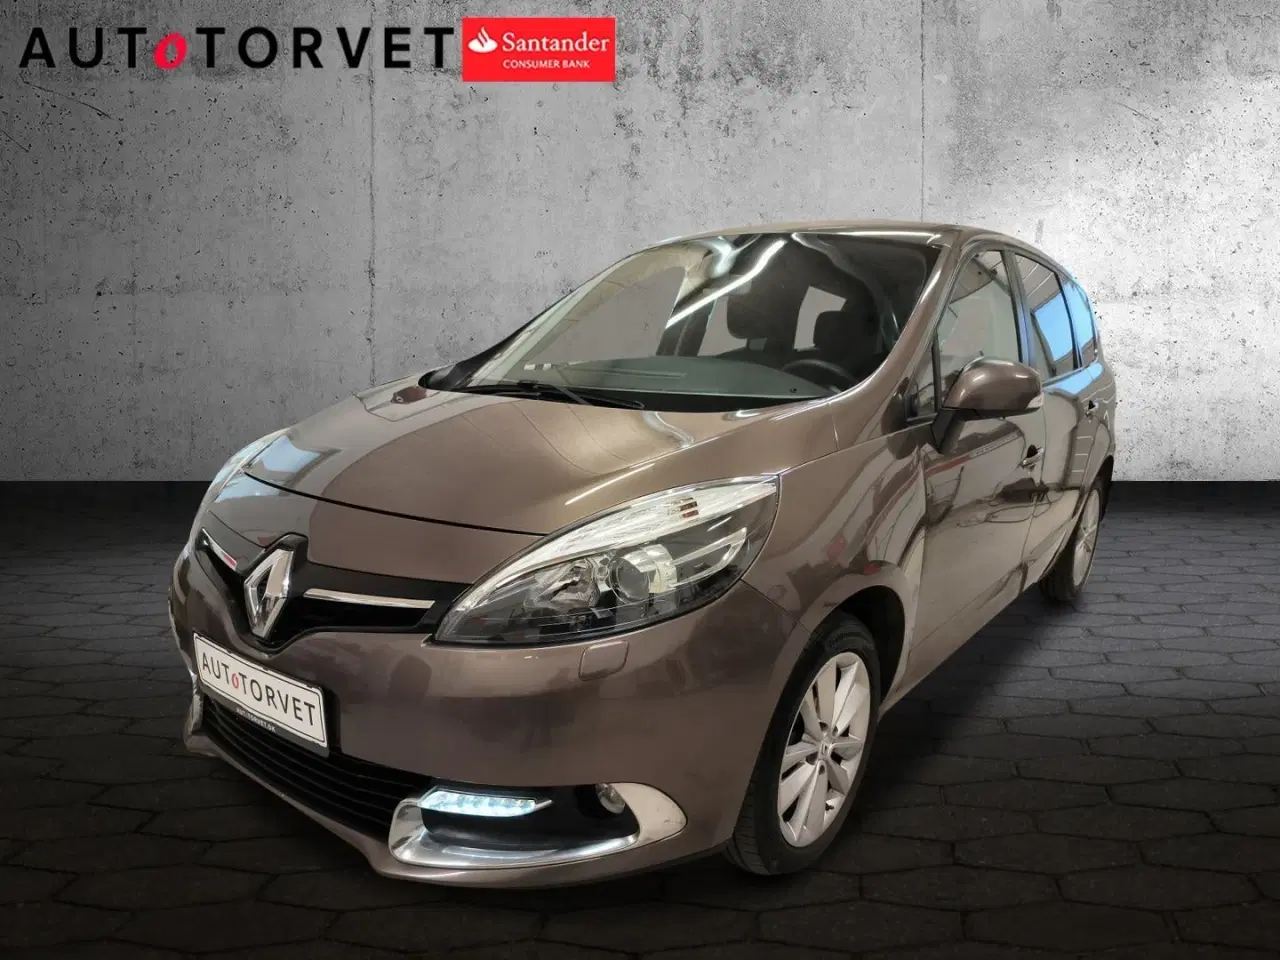 Billede 1 - Renault Grand Scenic III 1,5 dCi 110 Expression 7prs